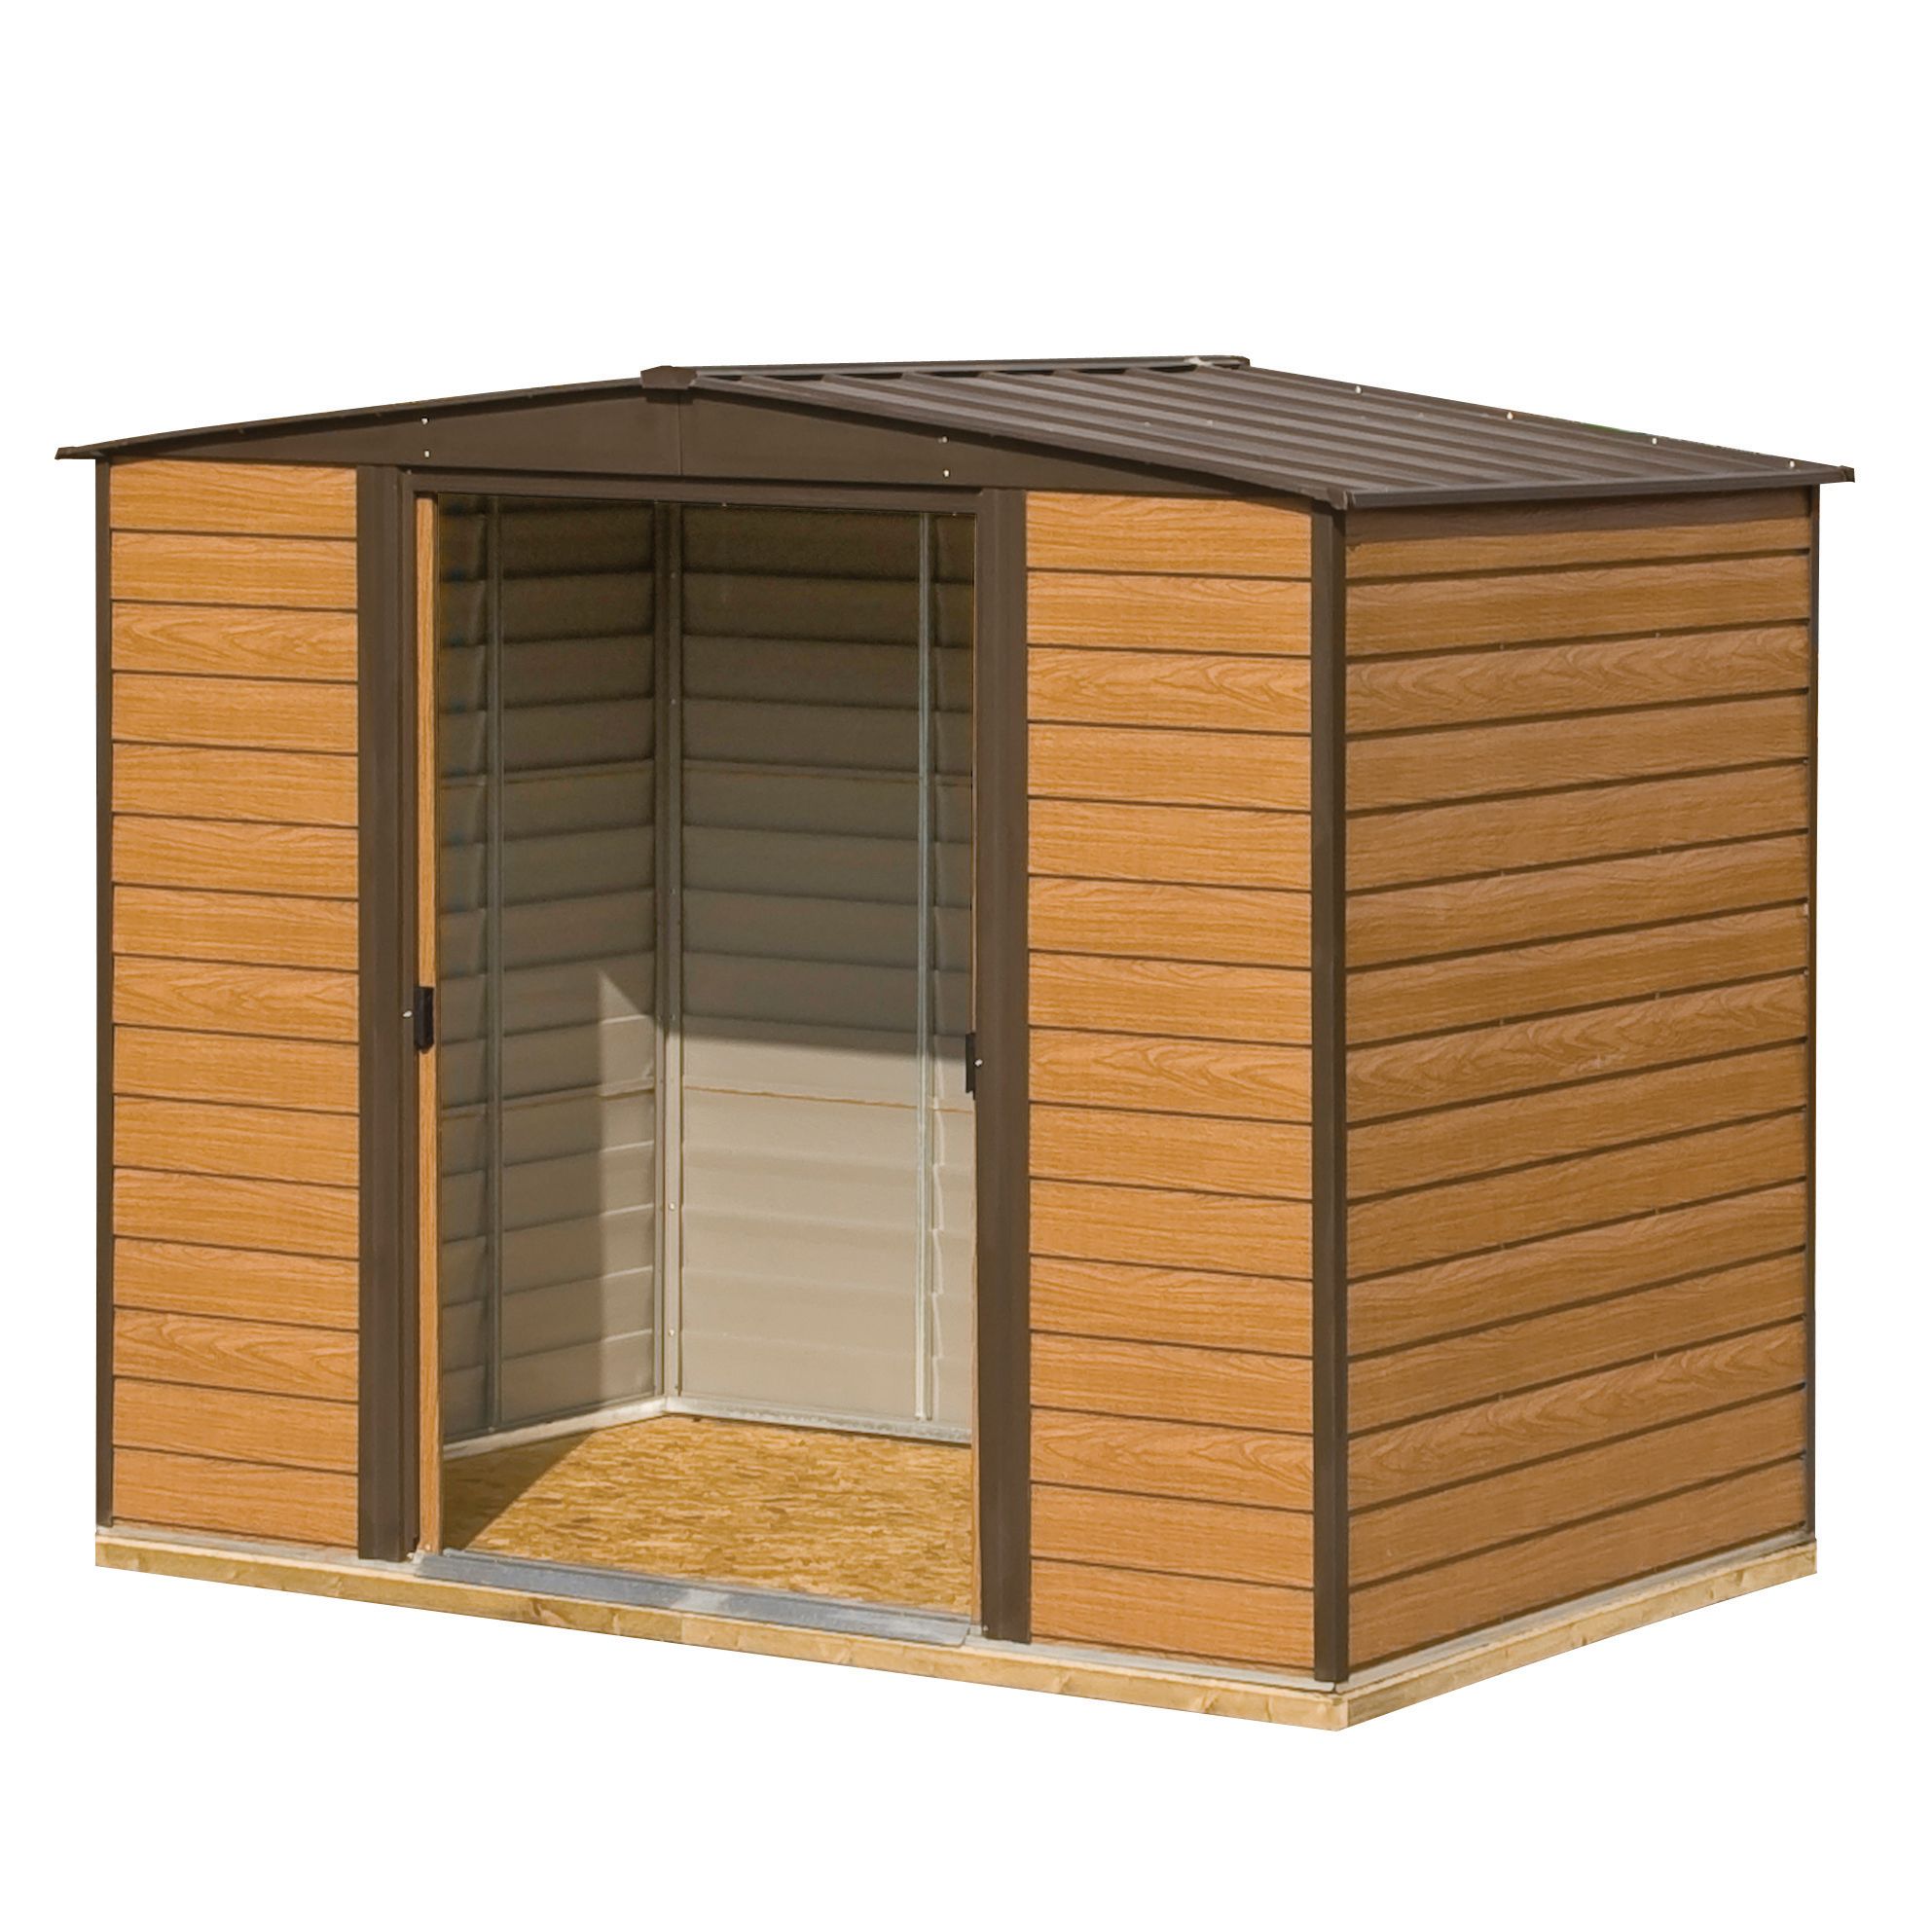 Rowlinson Woodvale Double Door Metal Apex Shed including Floor - 8 x 6ft